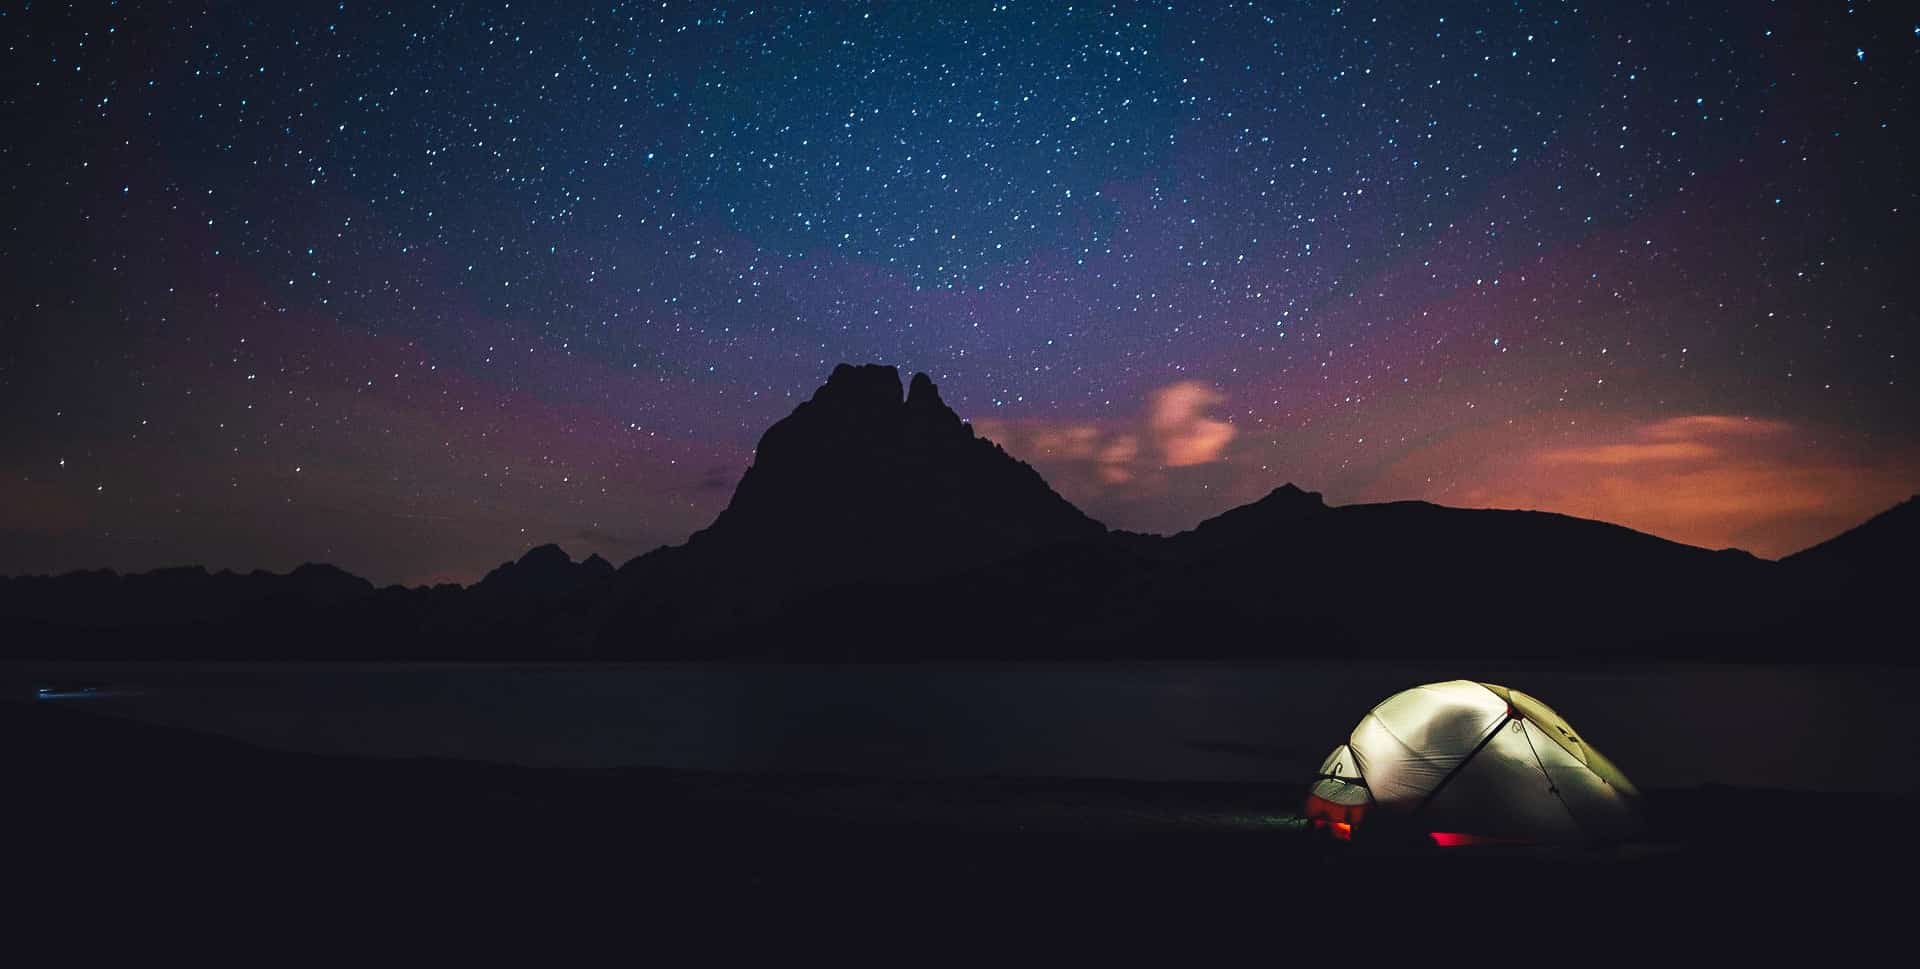 Warm tent on a starry night